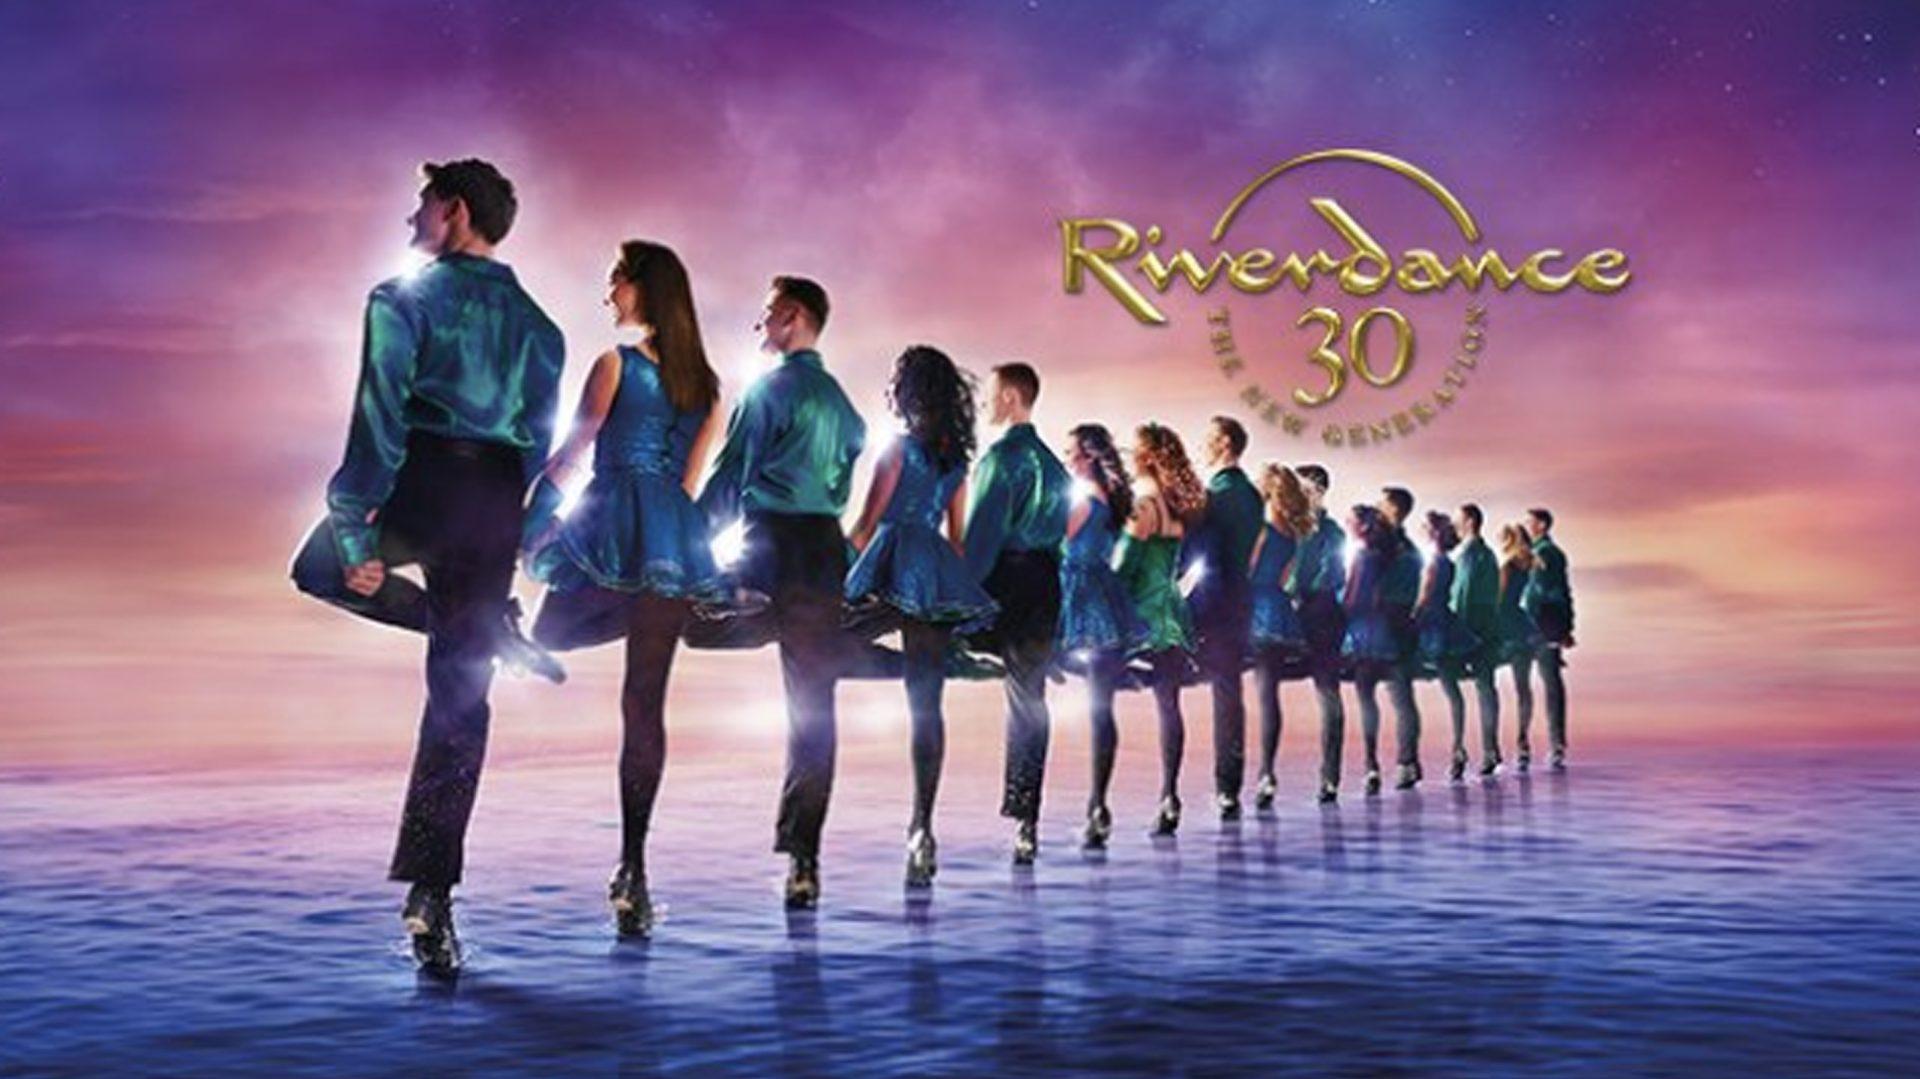 Since Riverdance first emerged onto the world stage, its fusion of Irish and international dance and music has captured the hearts of millions worldwide.